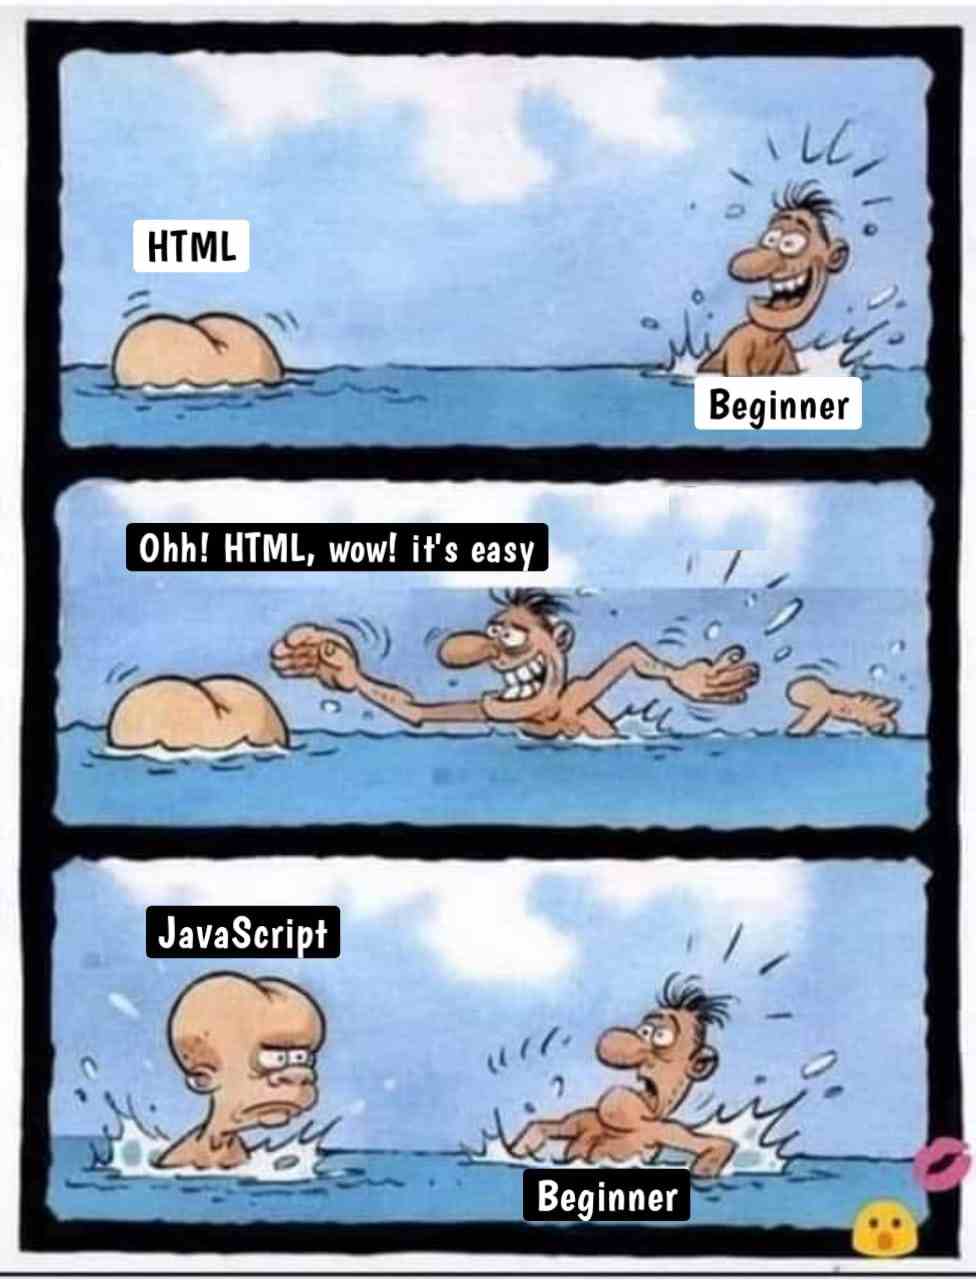 Only HTML lovers can understand this feeling